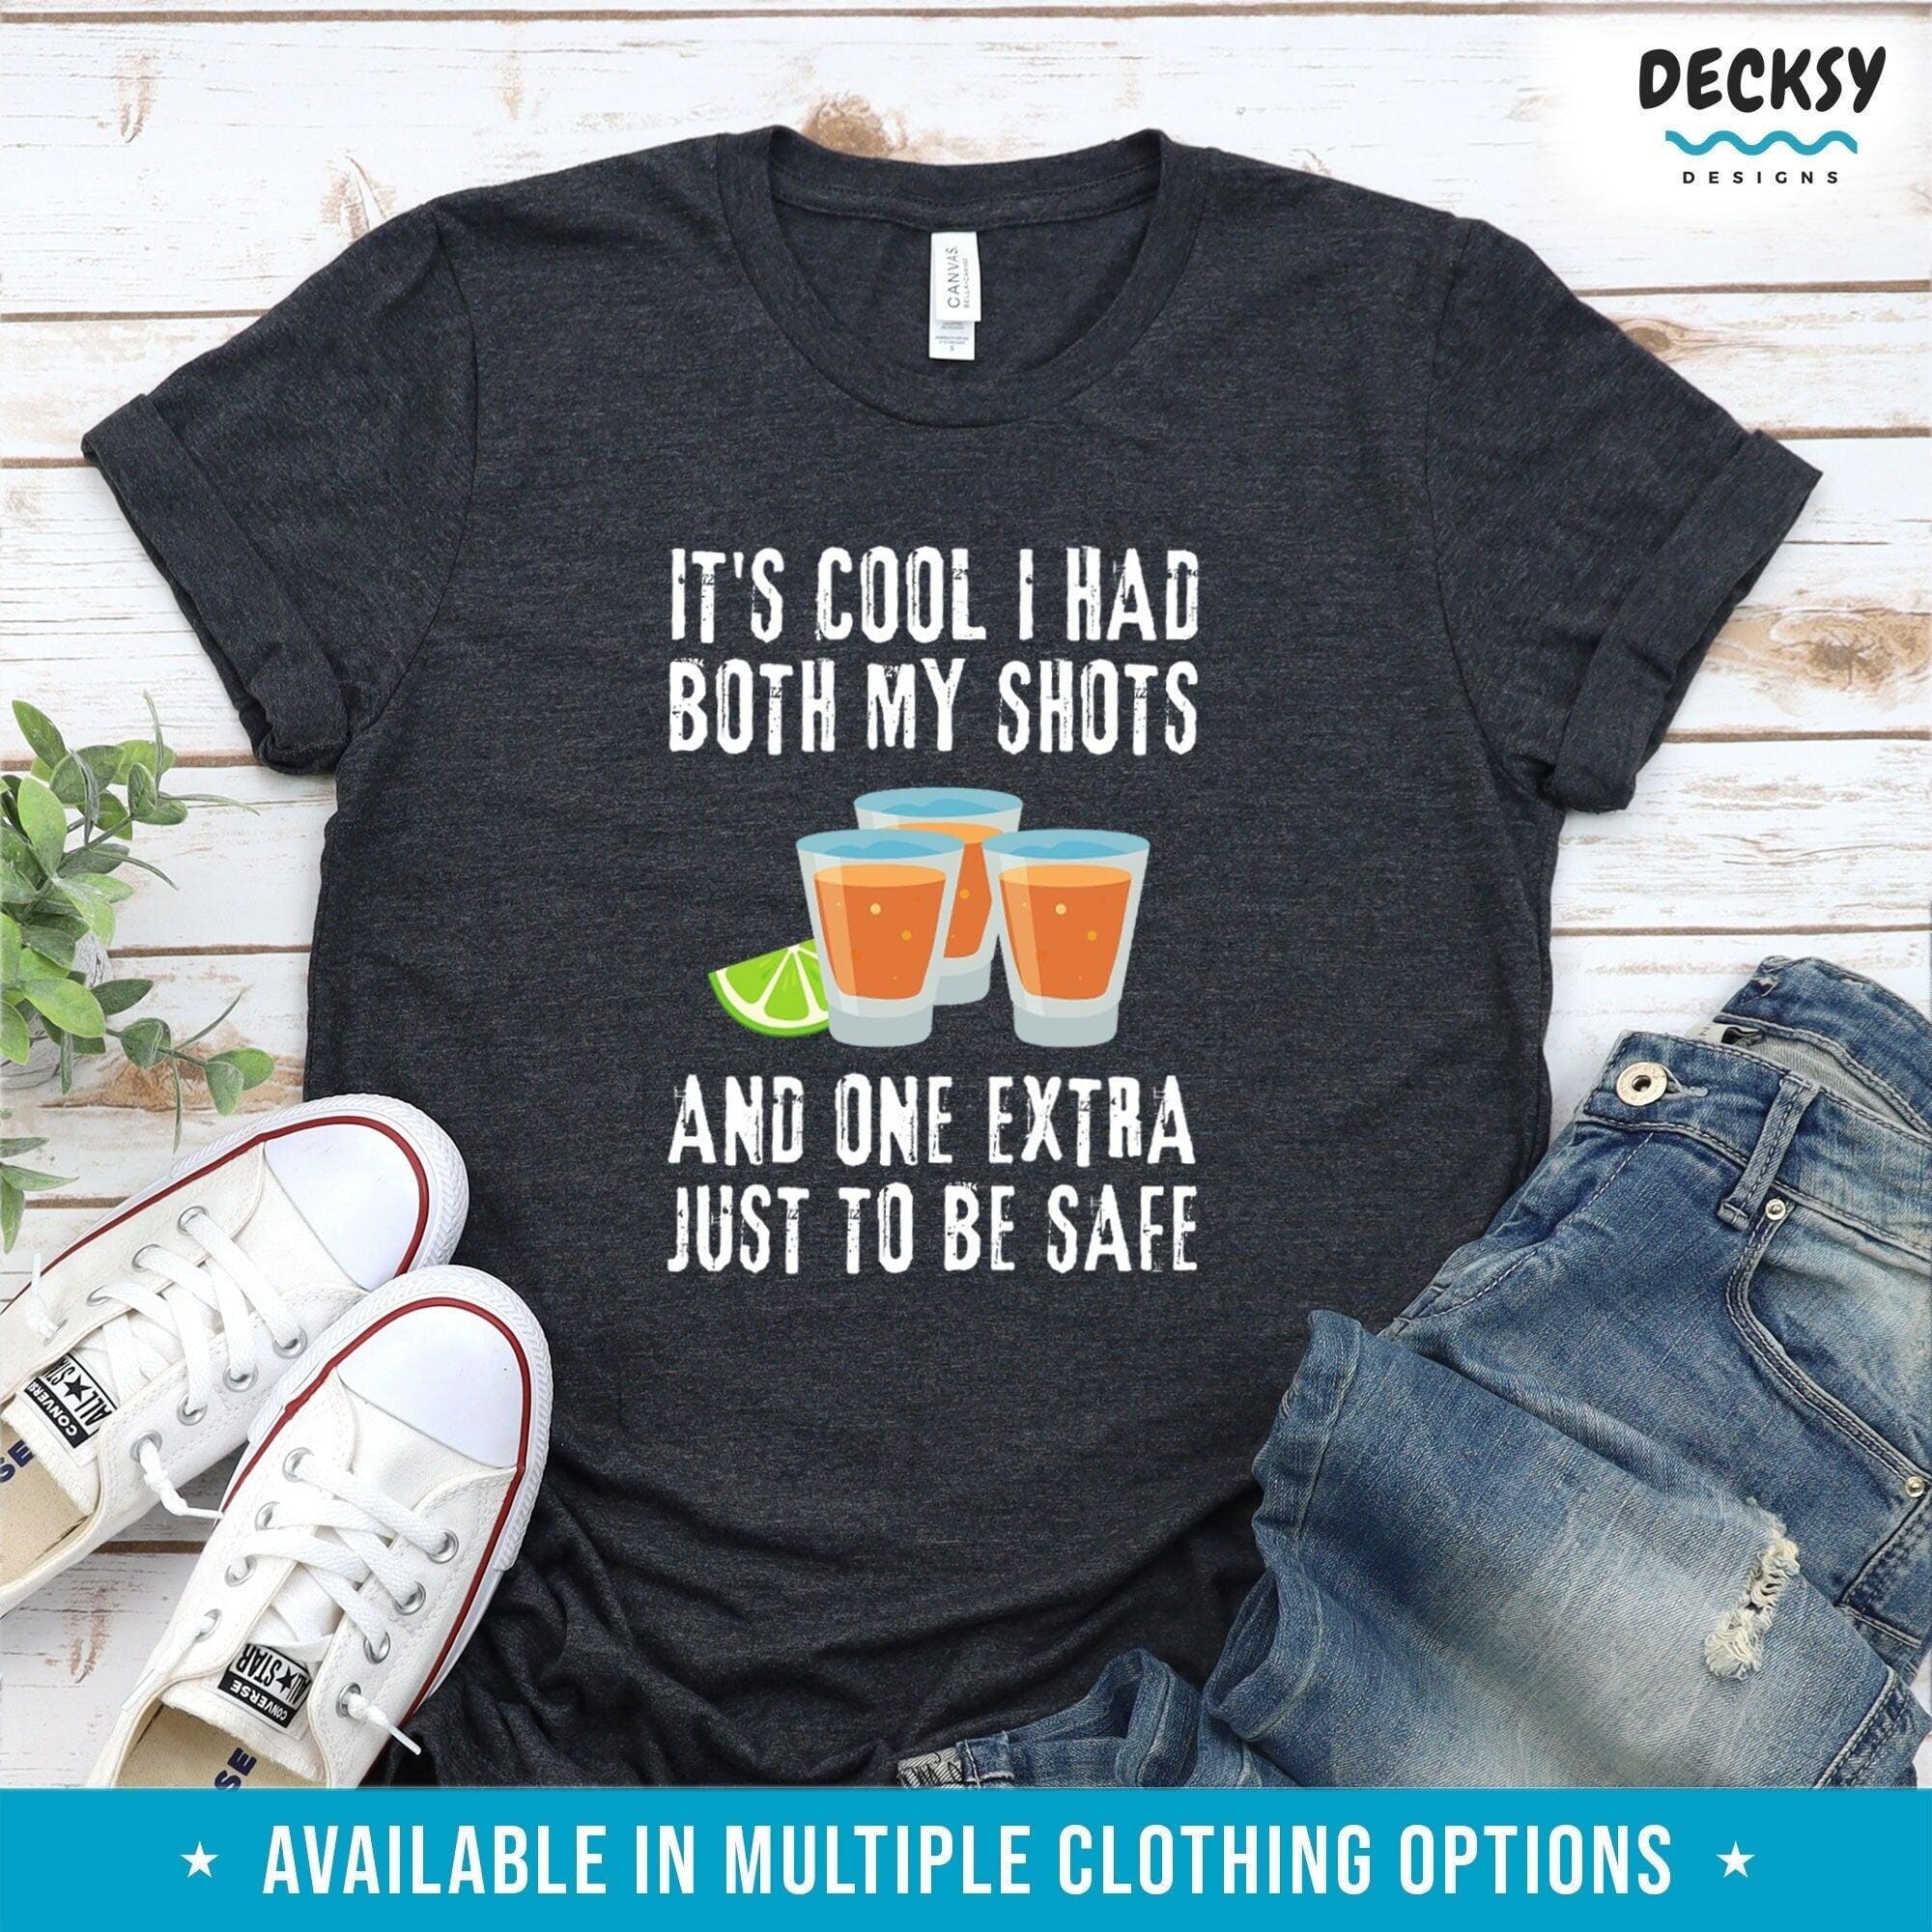 Funny Booster Shirt, Fully Vaccinated Gift-Clothing:Gender-Neutral Adult Clothing:Tops & Tees:T-shirts:Graphic Tees-DecksyDesigns